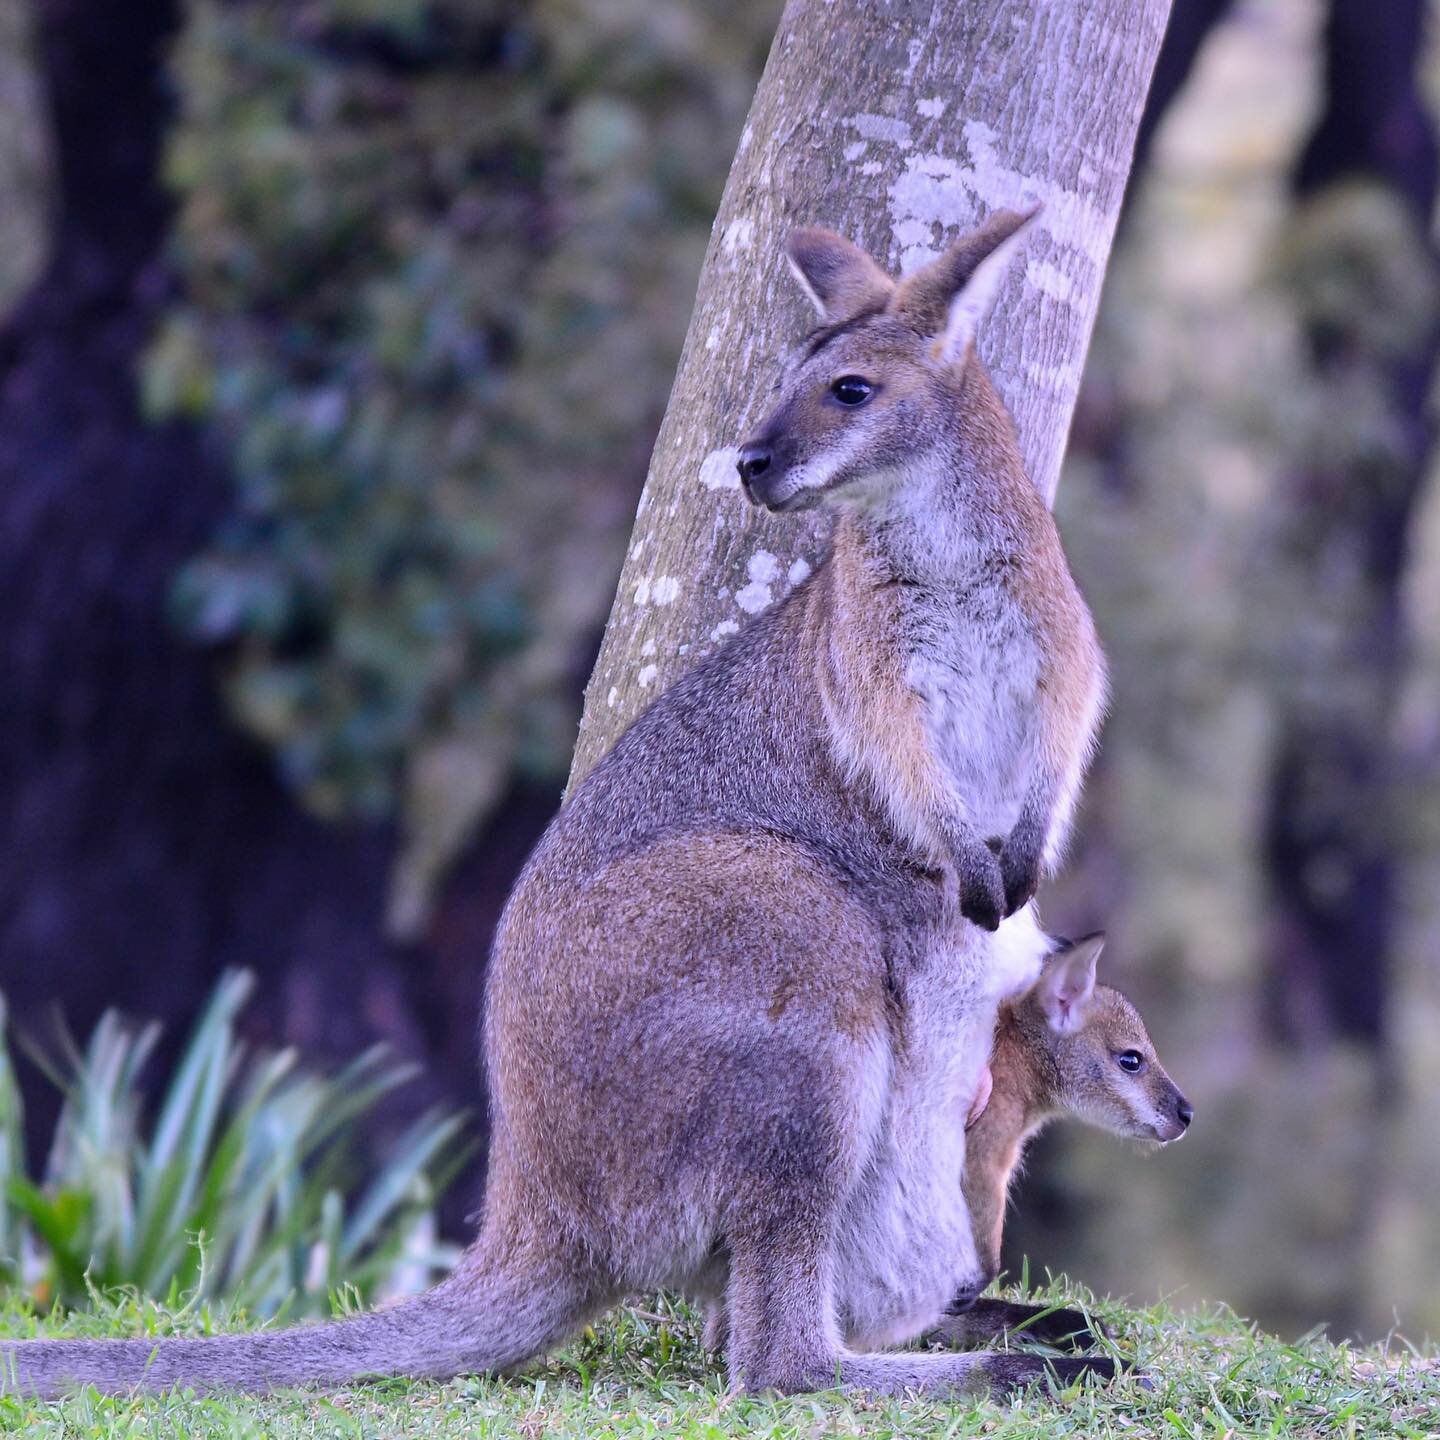 Looking more like mum every day!!! It won&rsquo;t be much longer now and the little one will be at foot. I can hardly wait!!! 

#wildbeauty #wallabies #wallabiesofinstagram #macropod #aussieanimals #animalloversofinstagram #wildlifeconsevation #kelly